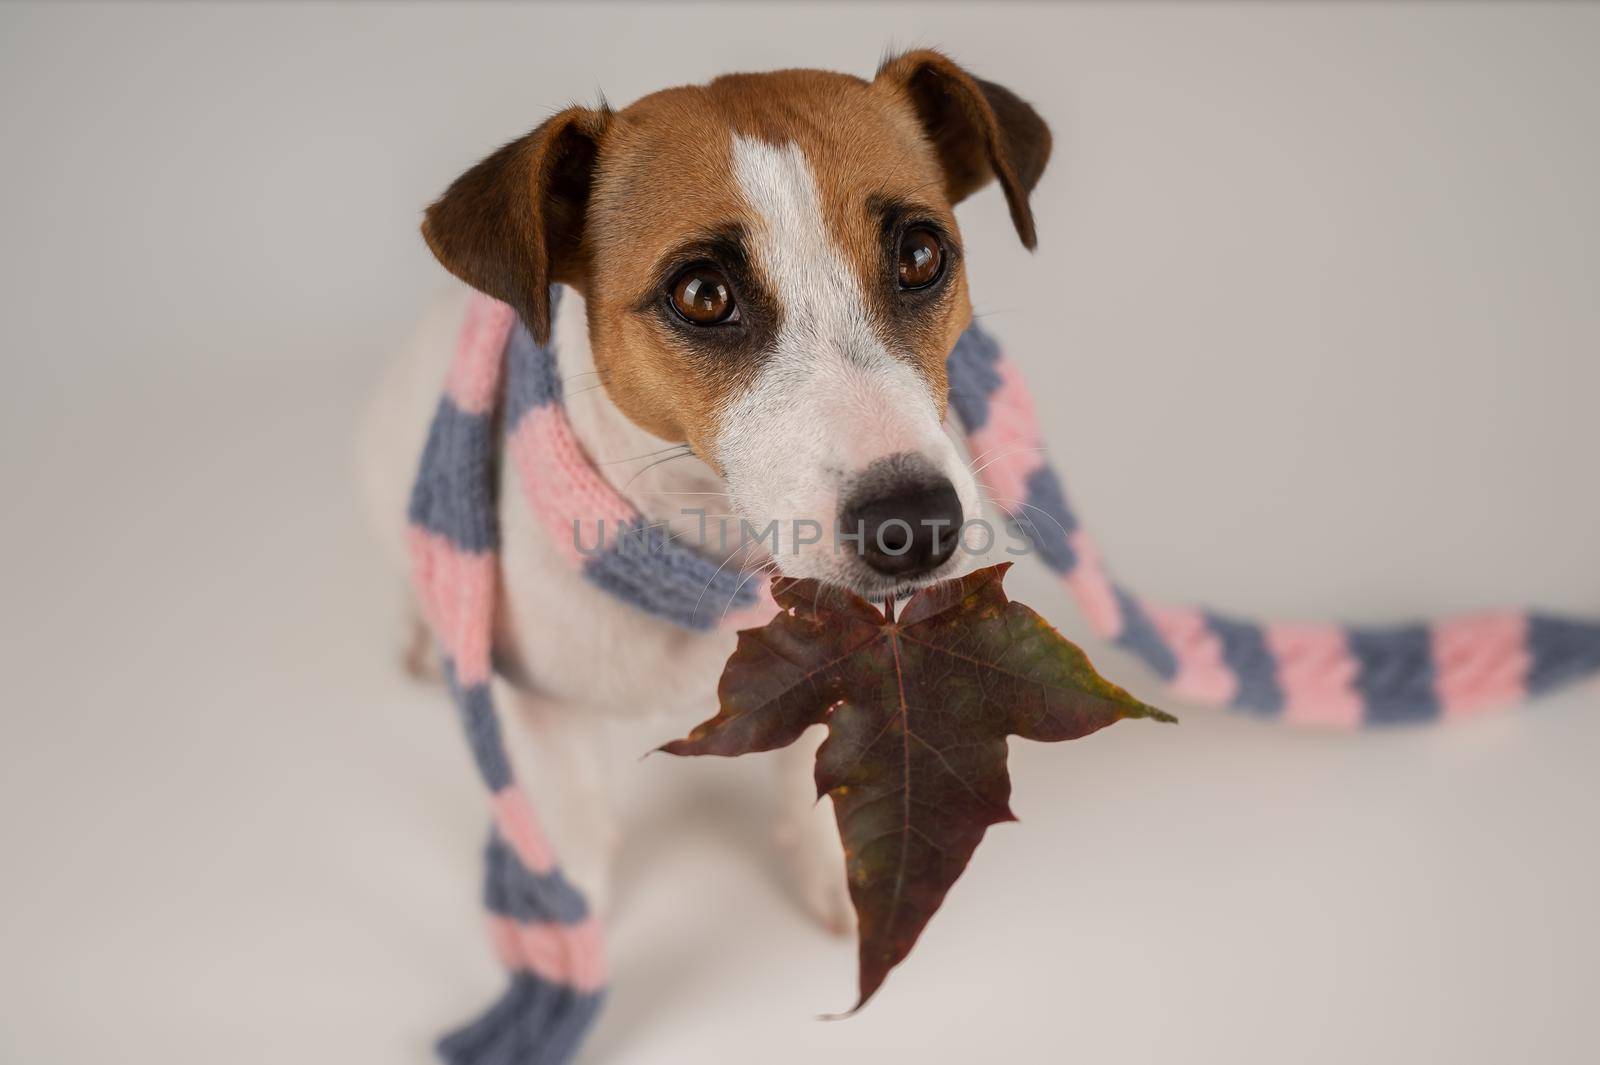 Dog Jack Russell Terrier wearing a knit scarf holding a maple leaf on a white background